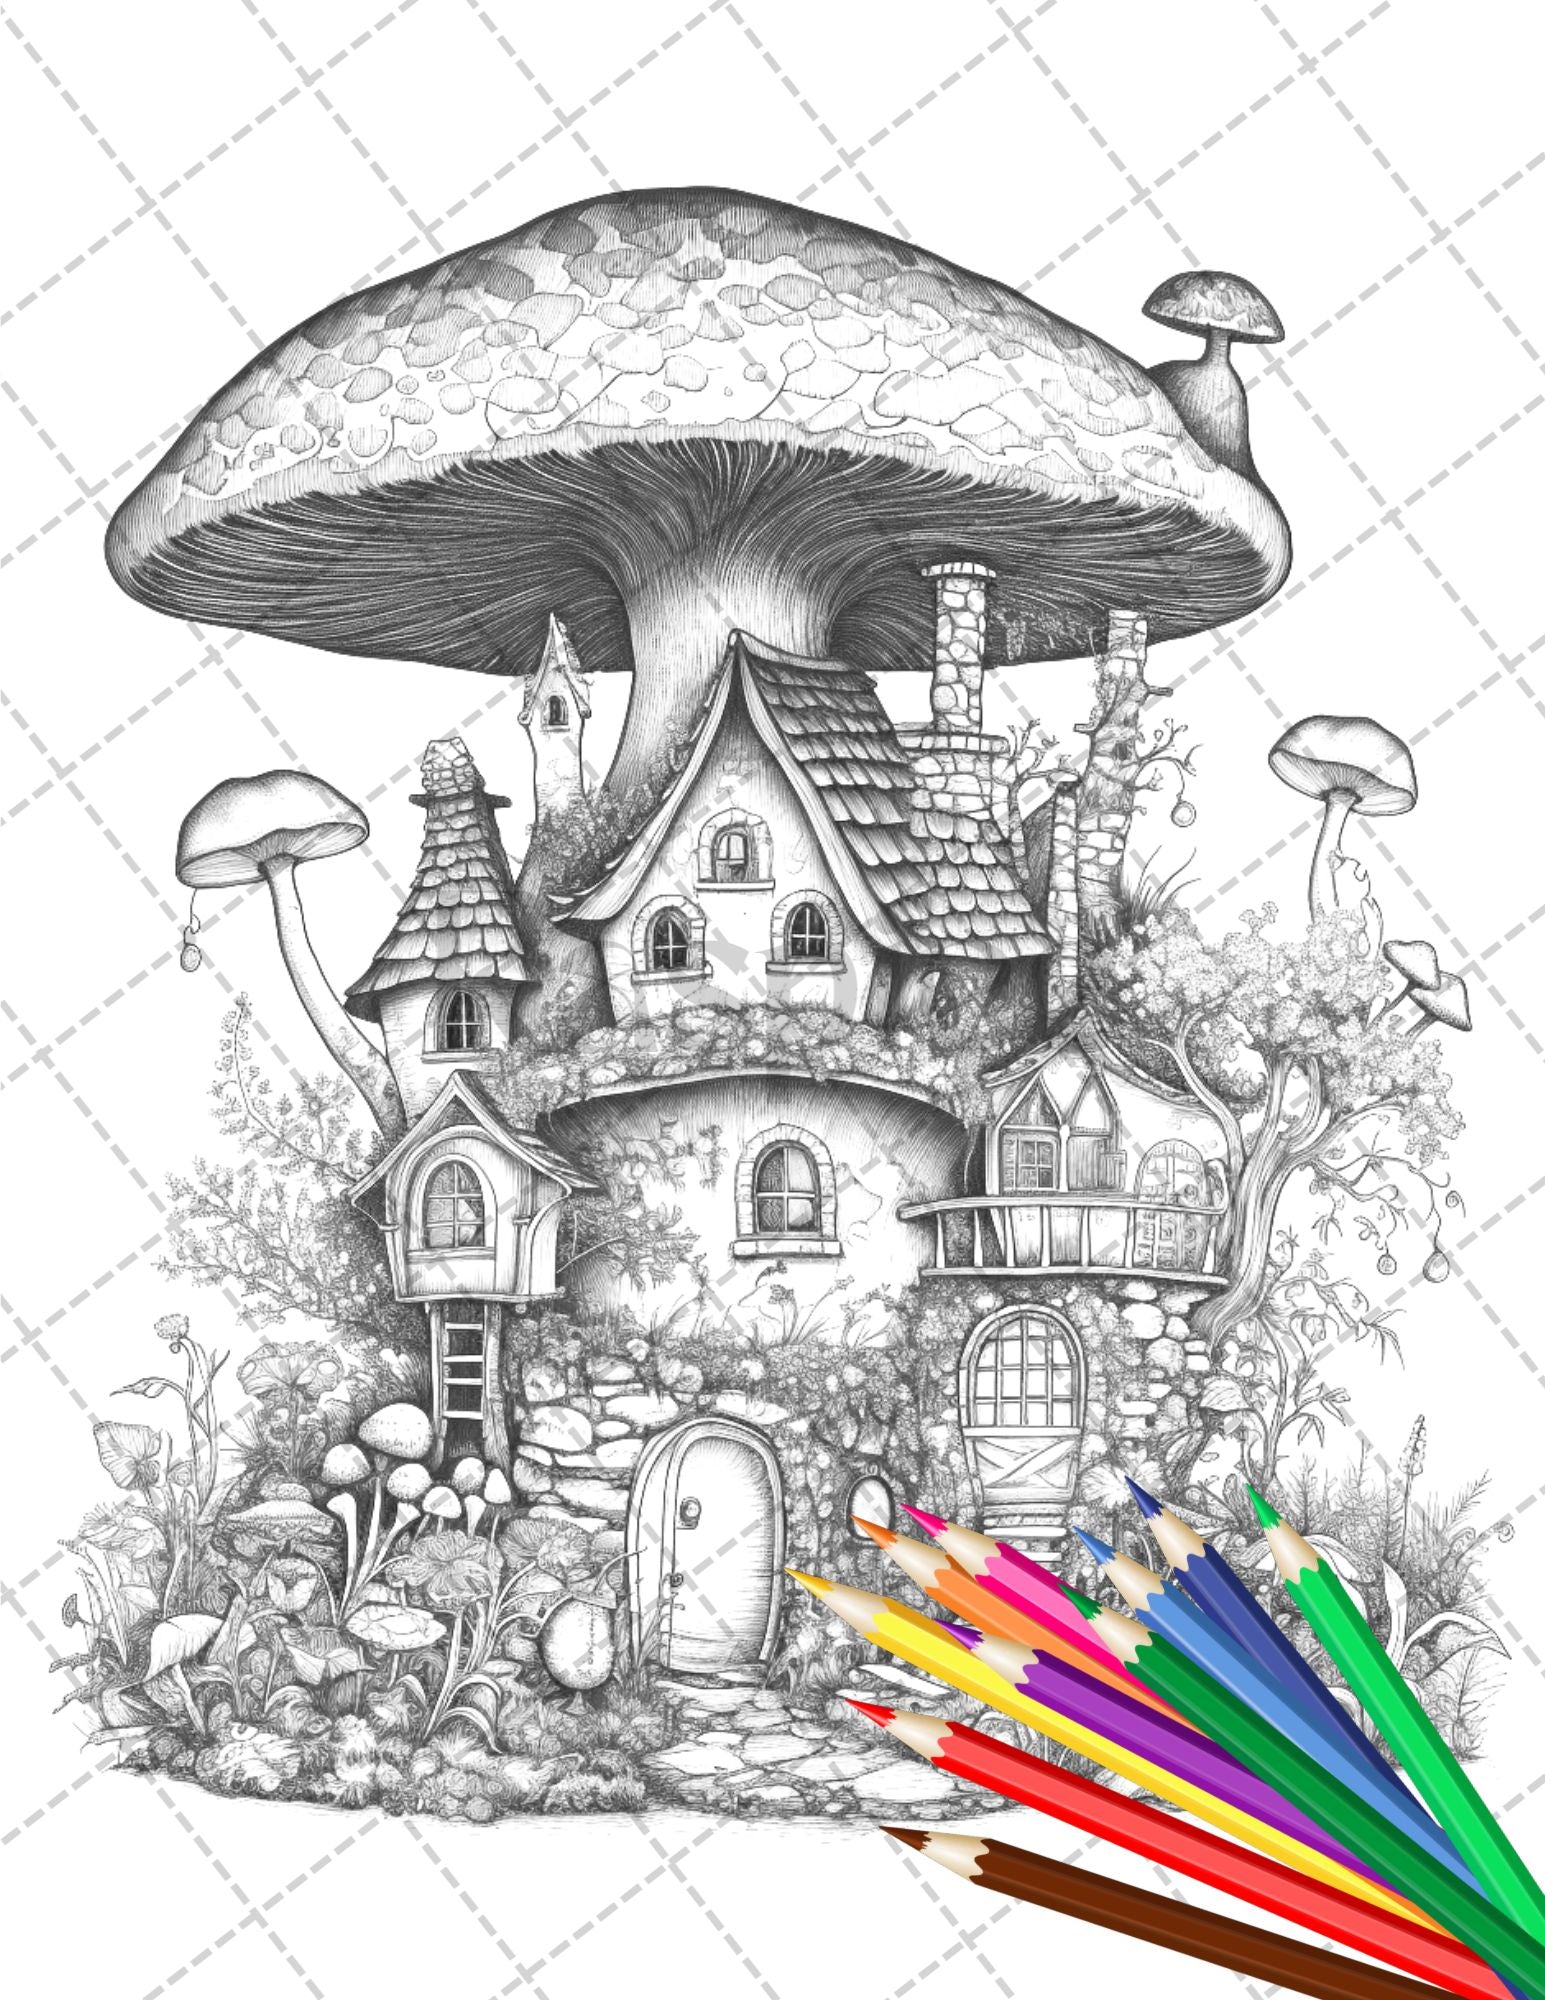  Whimsical Mushroom House Coloring Book: Adult Coloring Book of  Whimsical Mushroom House Coloring Pages